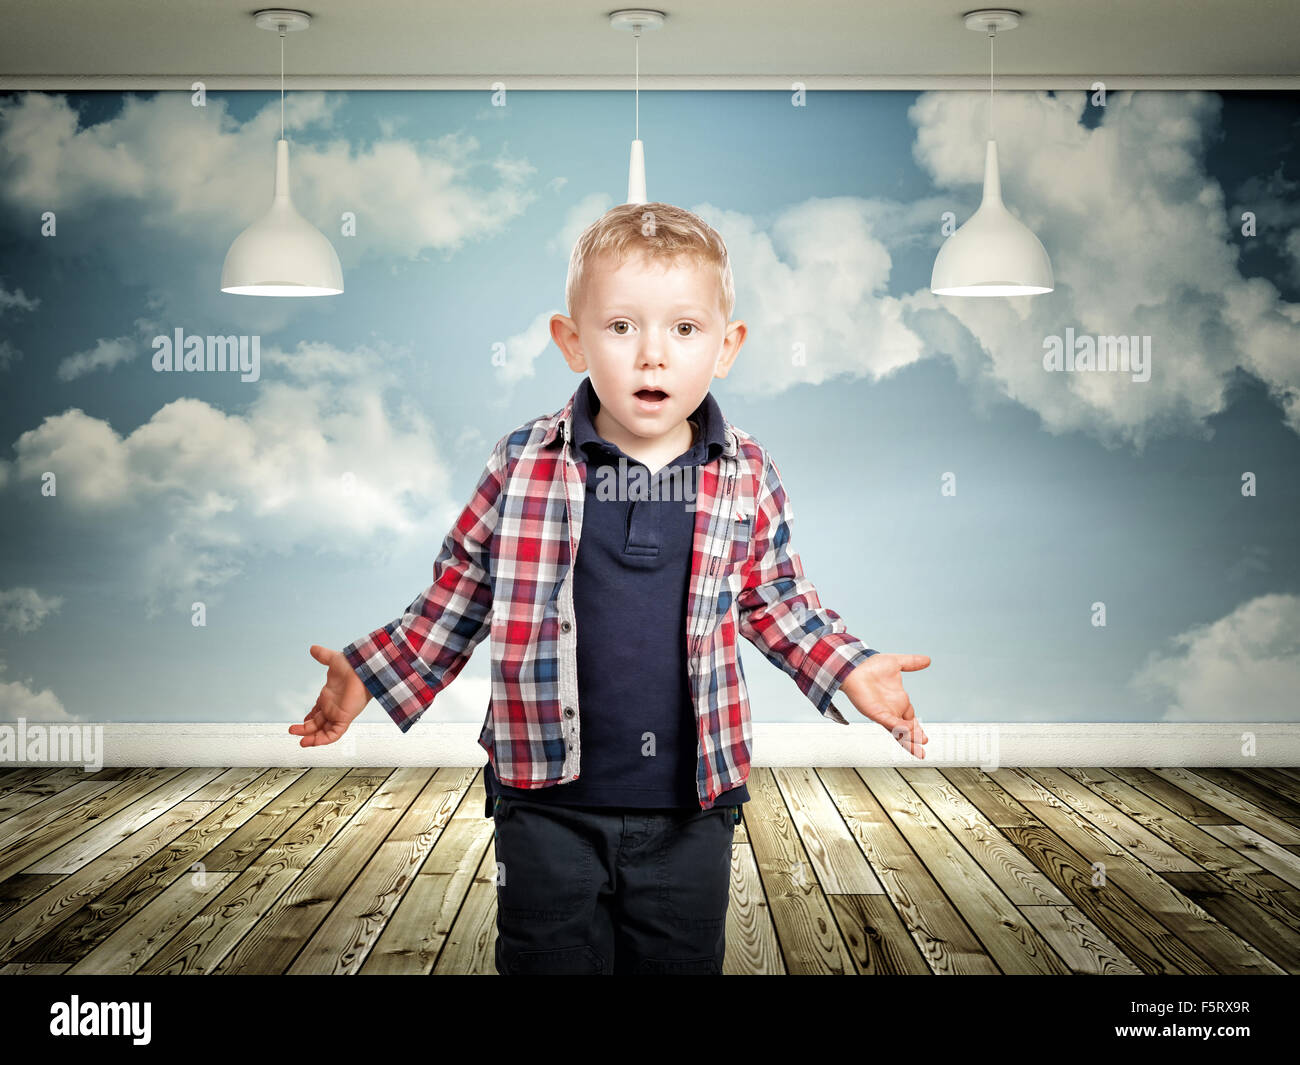 kid portrait and abstract 3d indoor Stock Photo